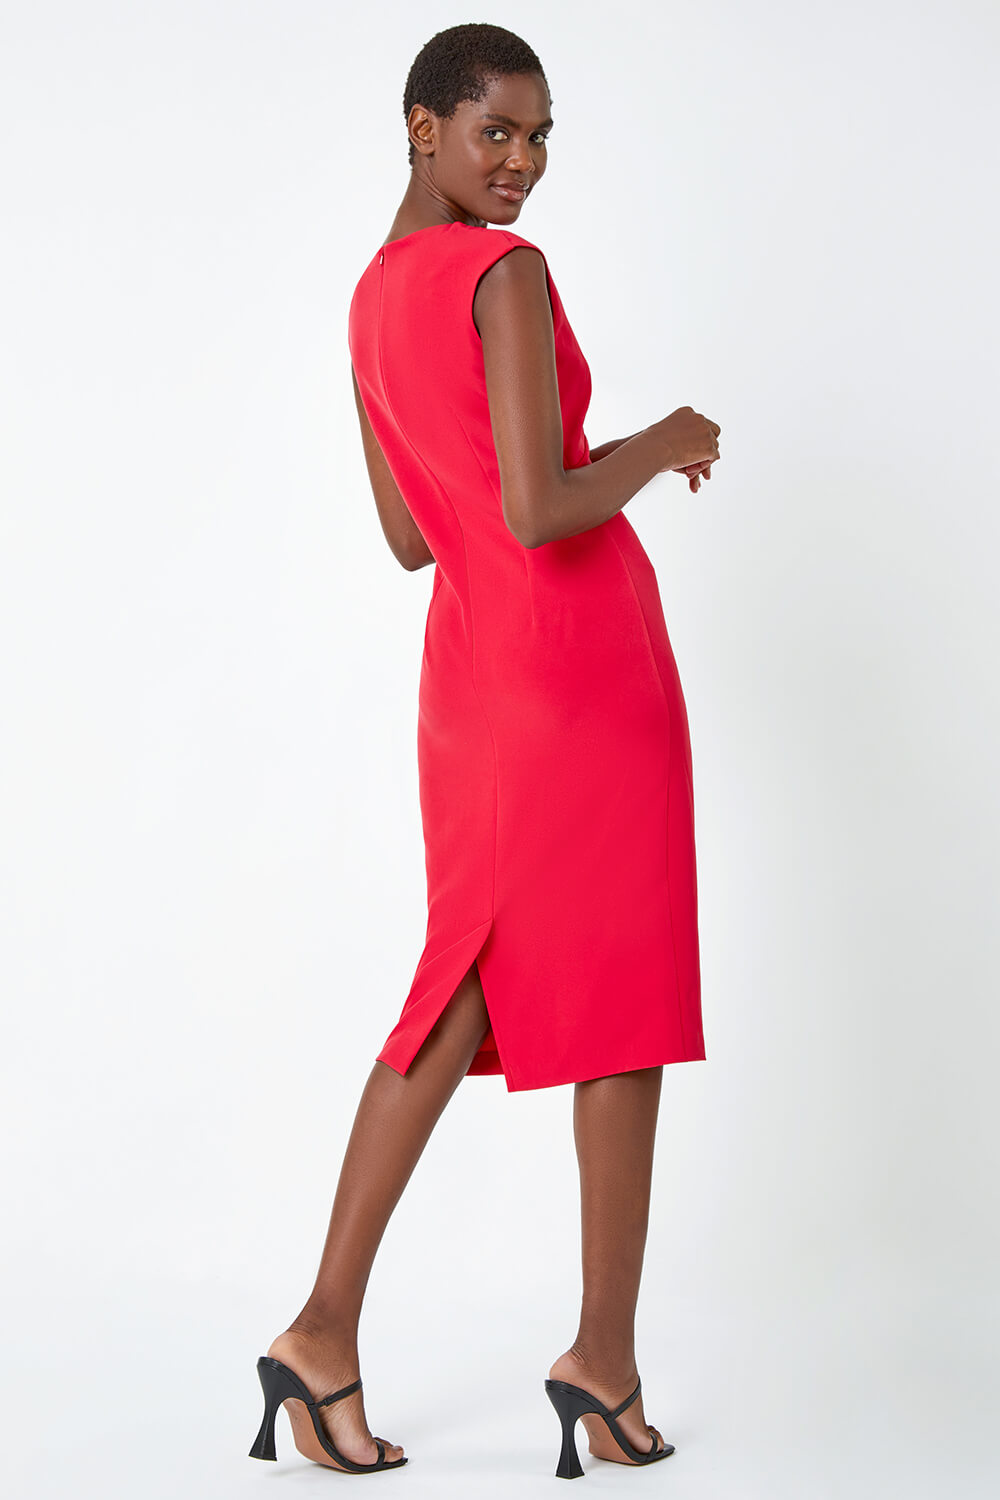 Red Sleeveless Pleated Stretch Ruched Dress, Image 3 of 5